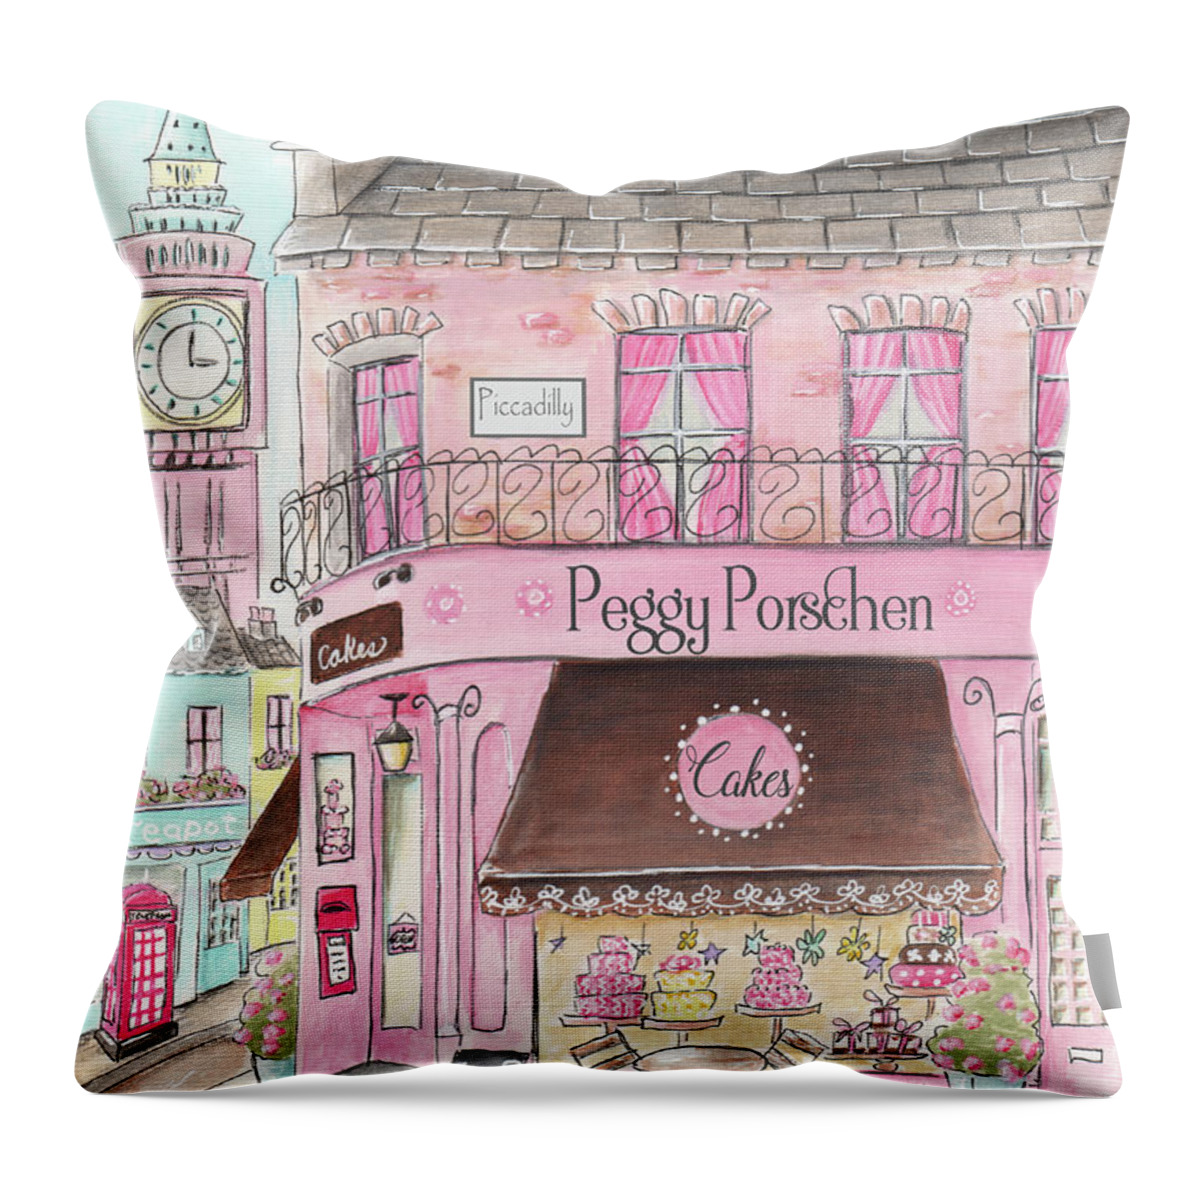 London Themed Nursery Throw Pillow featuring the painting London Girl - Cake Shop Inspired By Peggy Porschen Cakes by Debbie Cerone